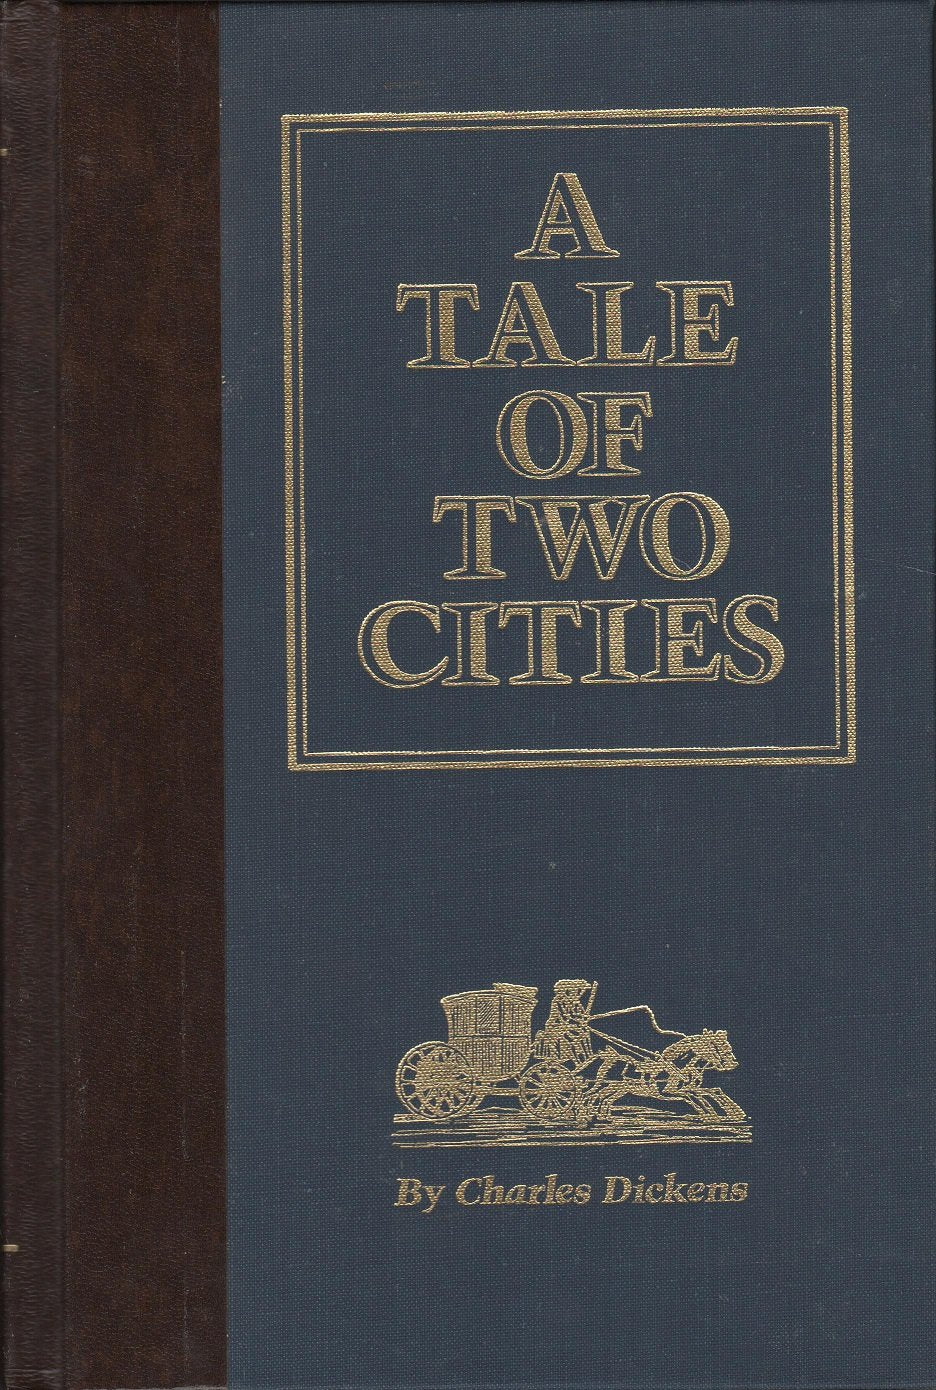 Livre ISBN 0895771799 A tale of two cities (Charles Dickens)